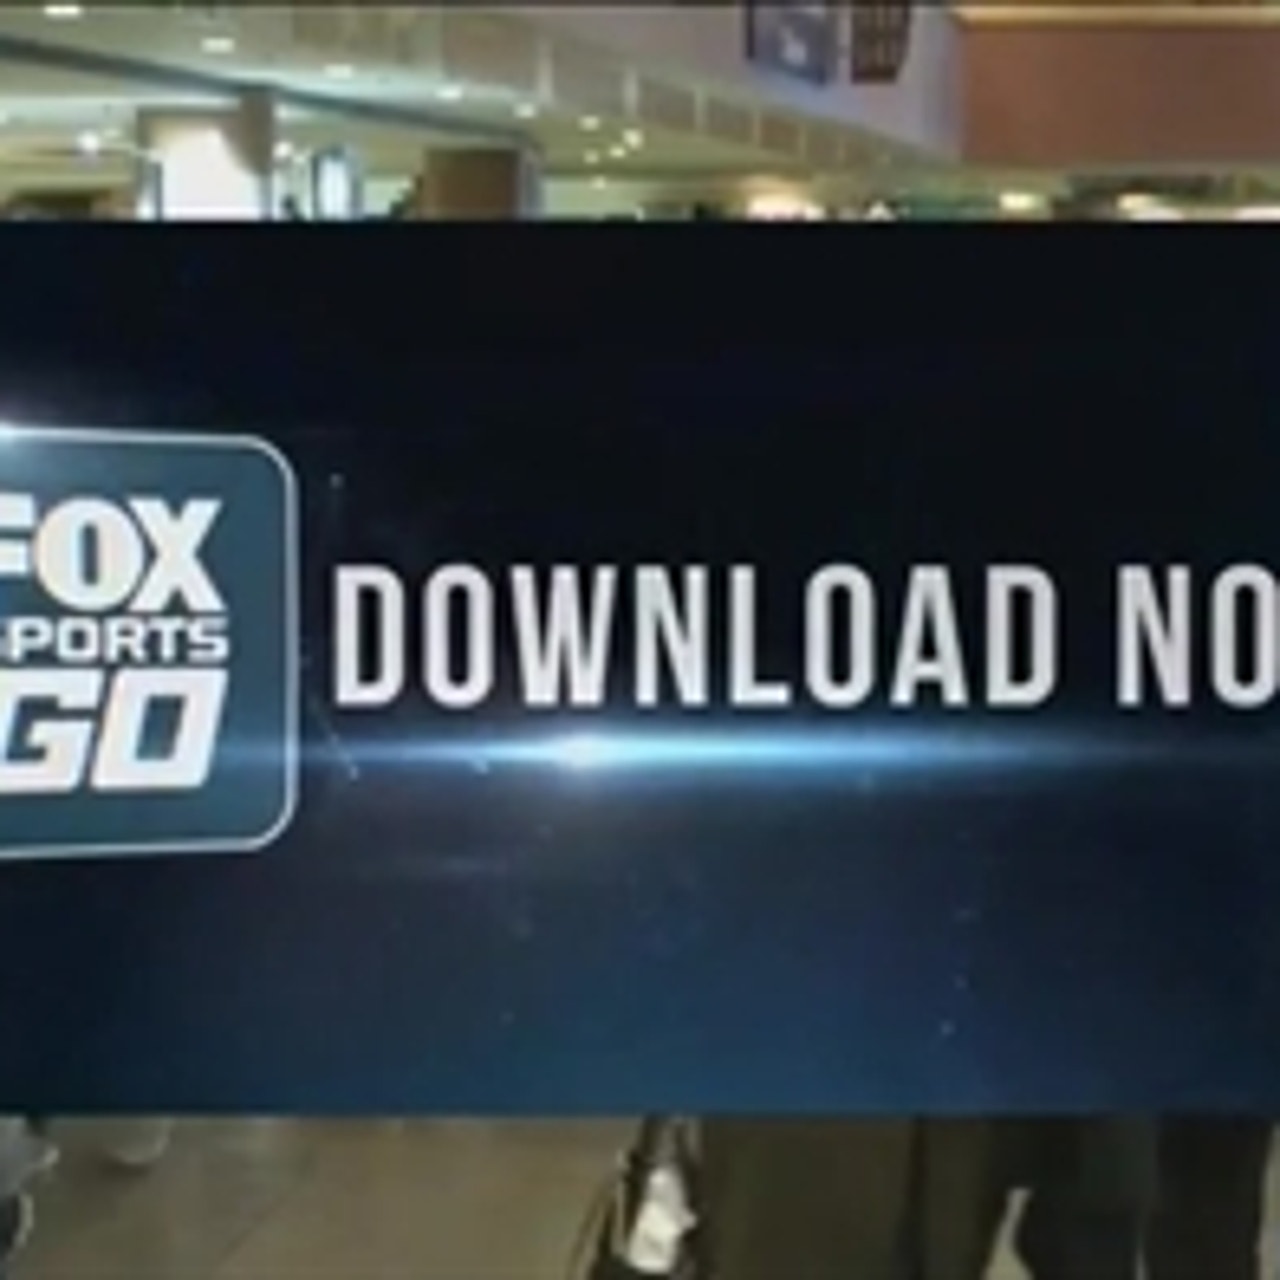 Never miss another Wild game with FOX Sports GO FOX Sports